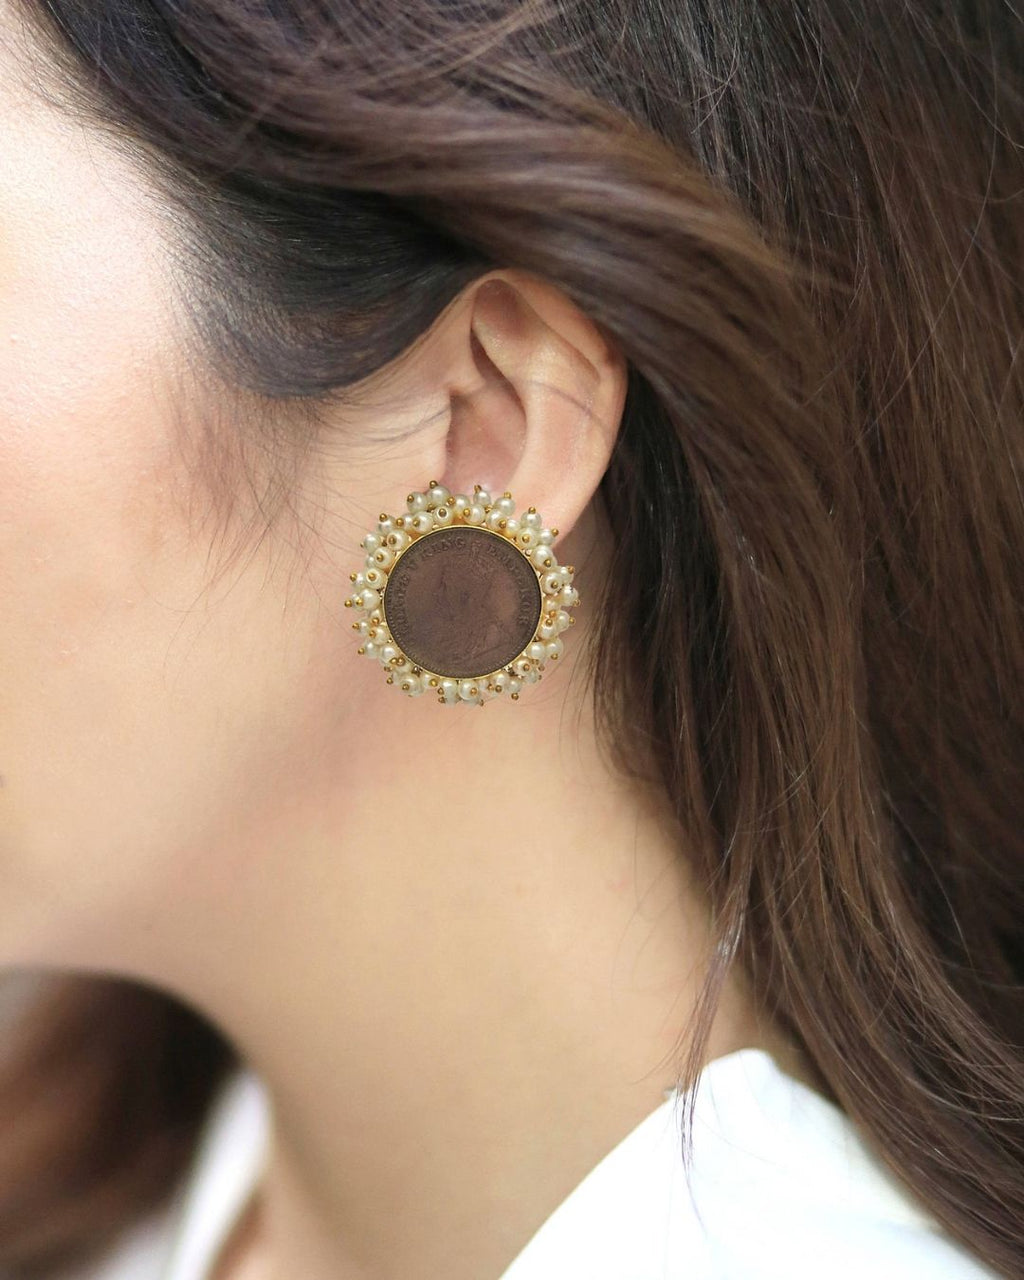 Coin Bloom Earrings - Earrings - Handcrafted Jewellery - Made in India - Dubai Jewellery, Fashion & Lifestyle - Dori